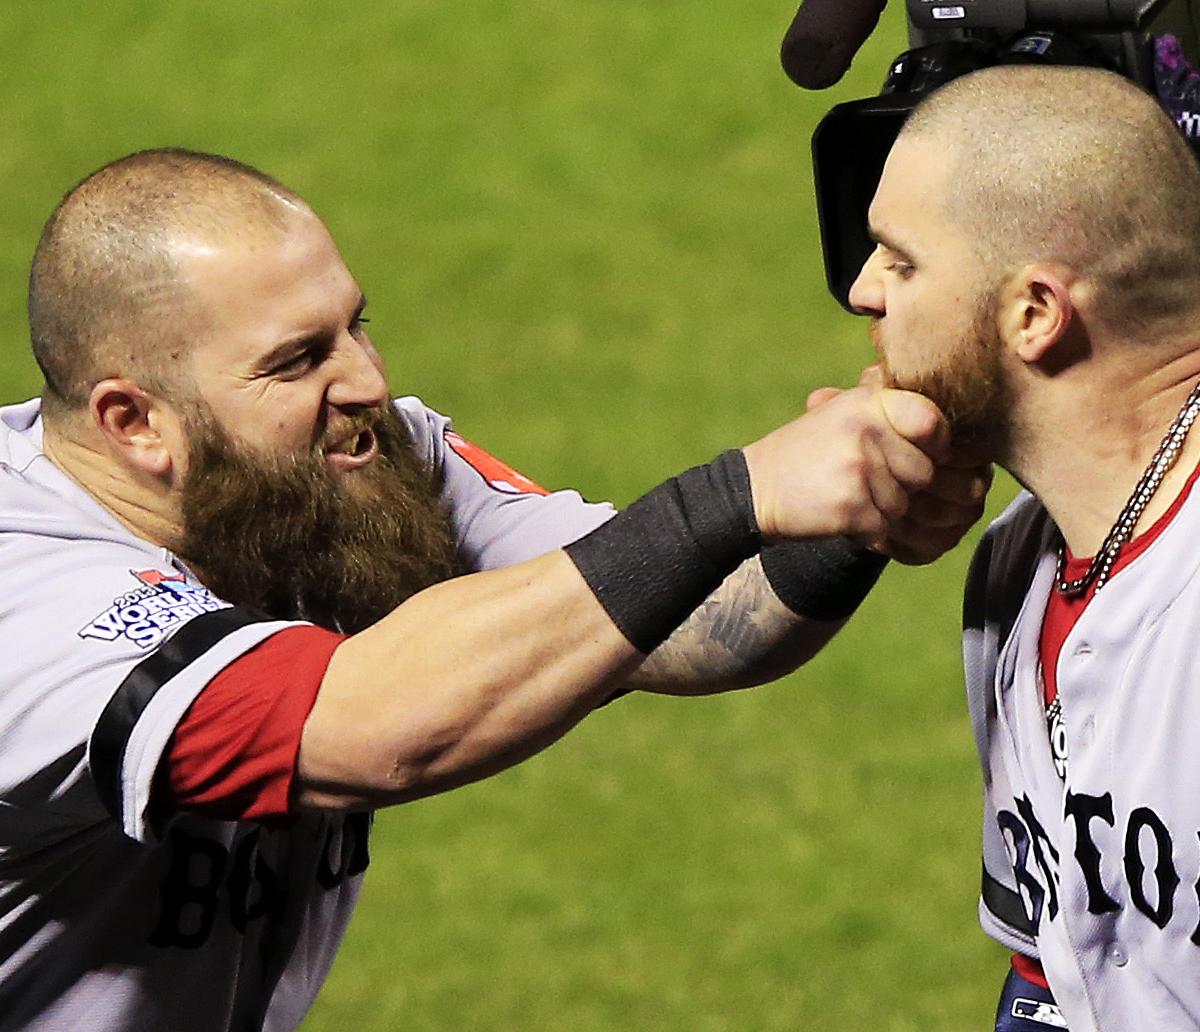 Power Ranking All Red Sox Beards at the 2013 World Series | Bleacher Report | Latest ...